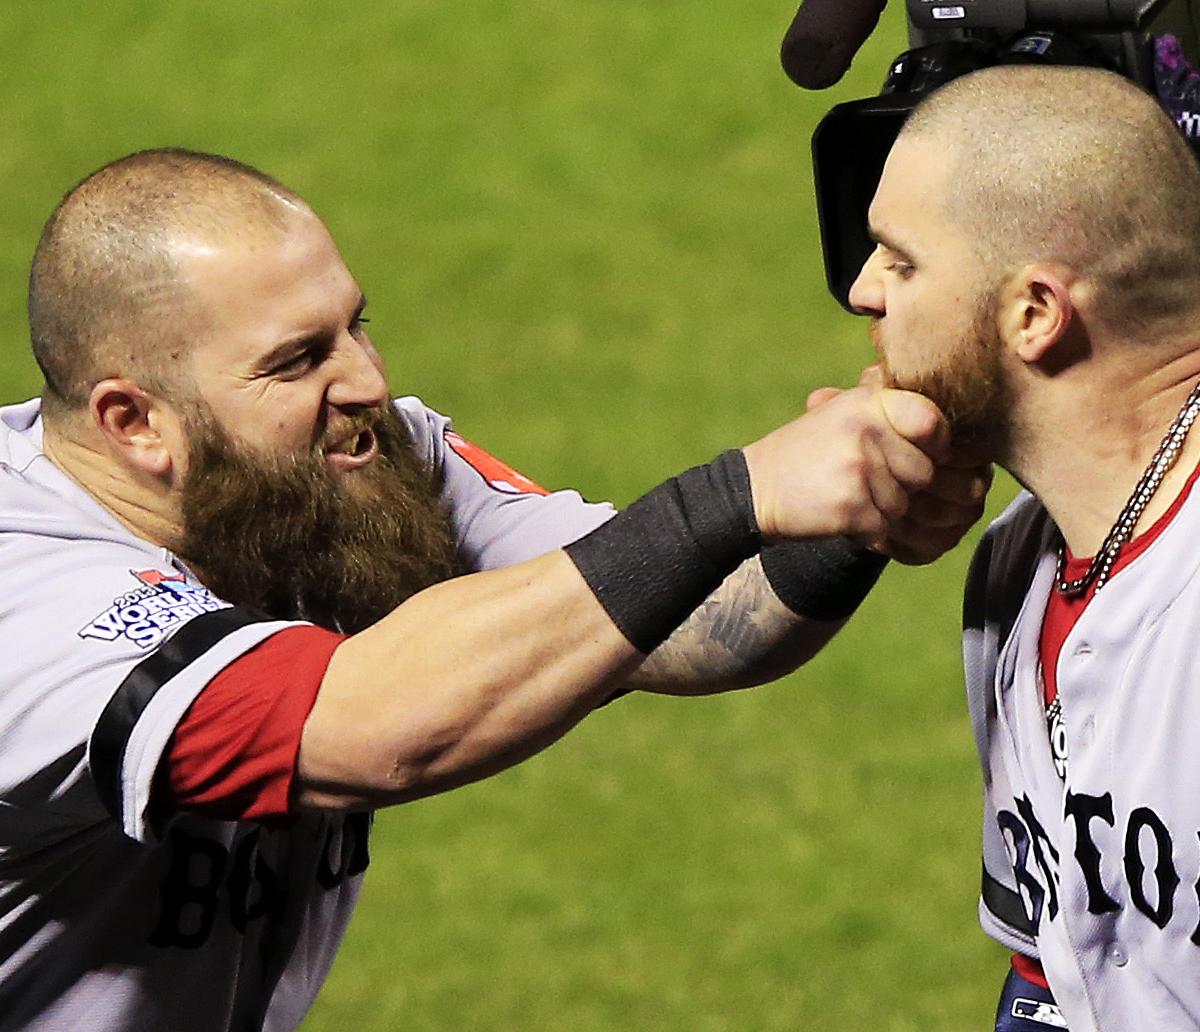 Power Ranking All Red Sox Beards at the 2013 World Series | Bleacher Report | Latest ...